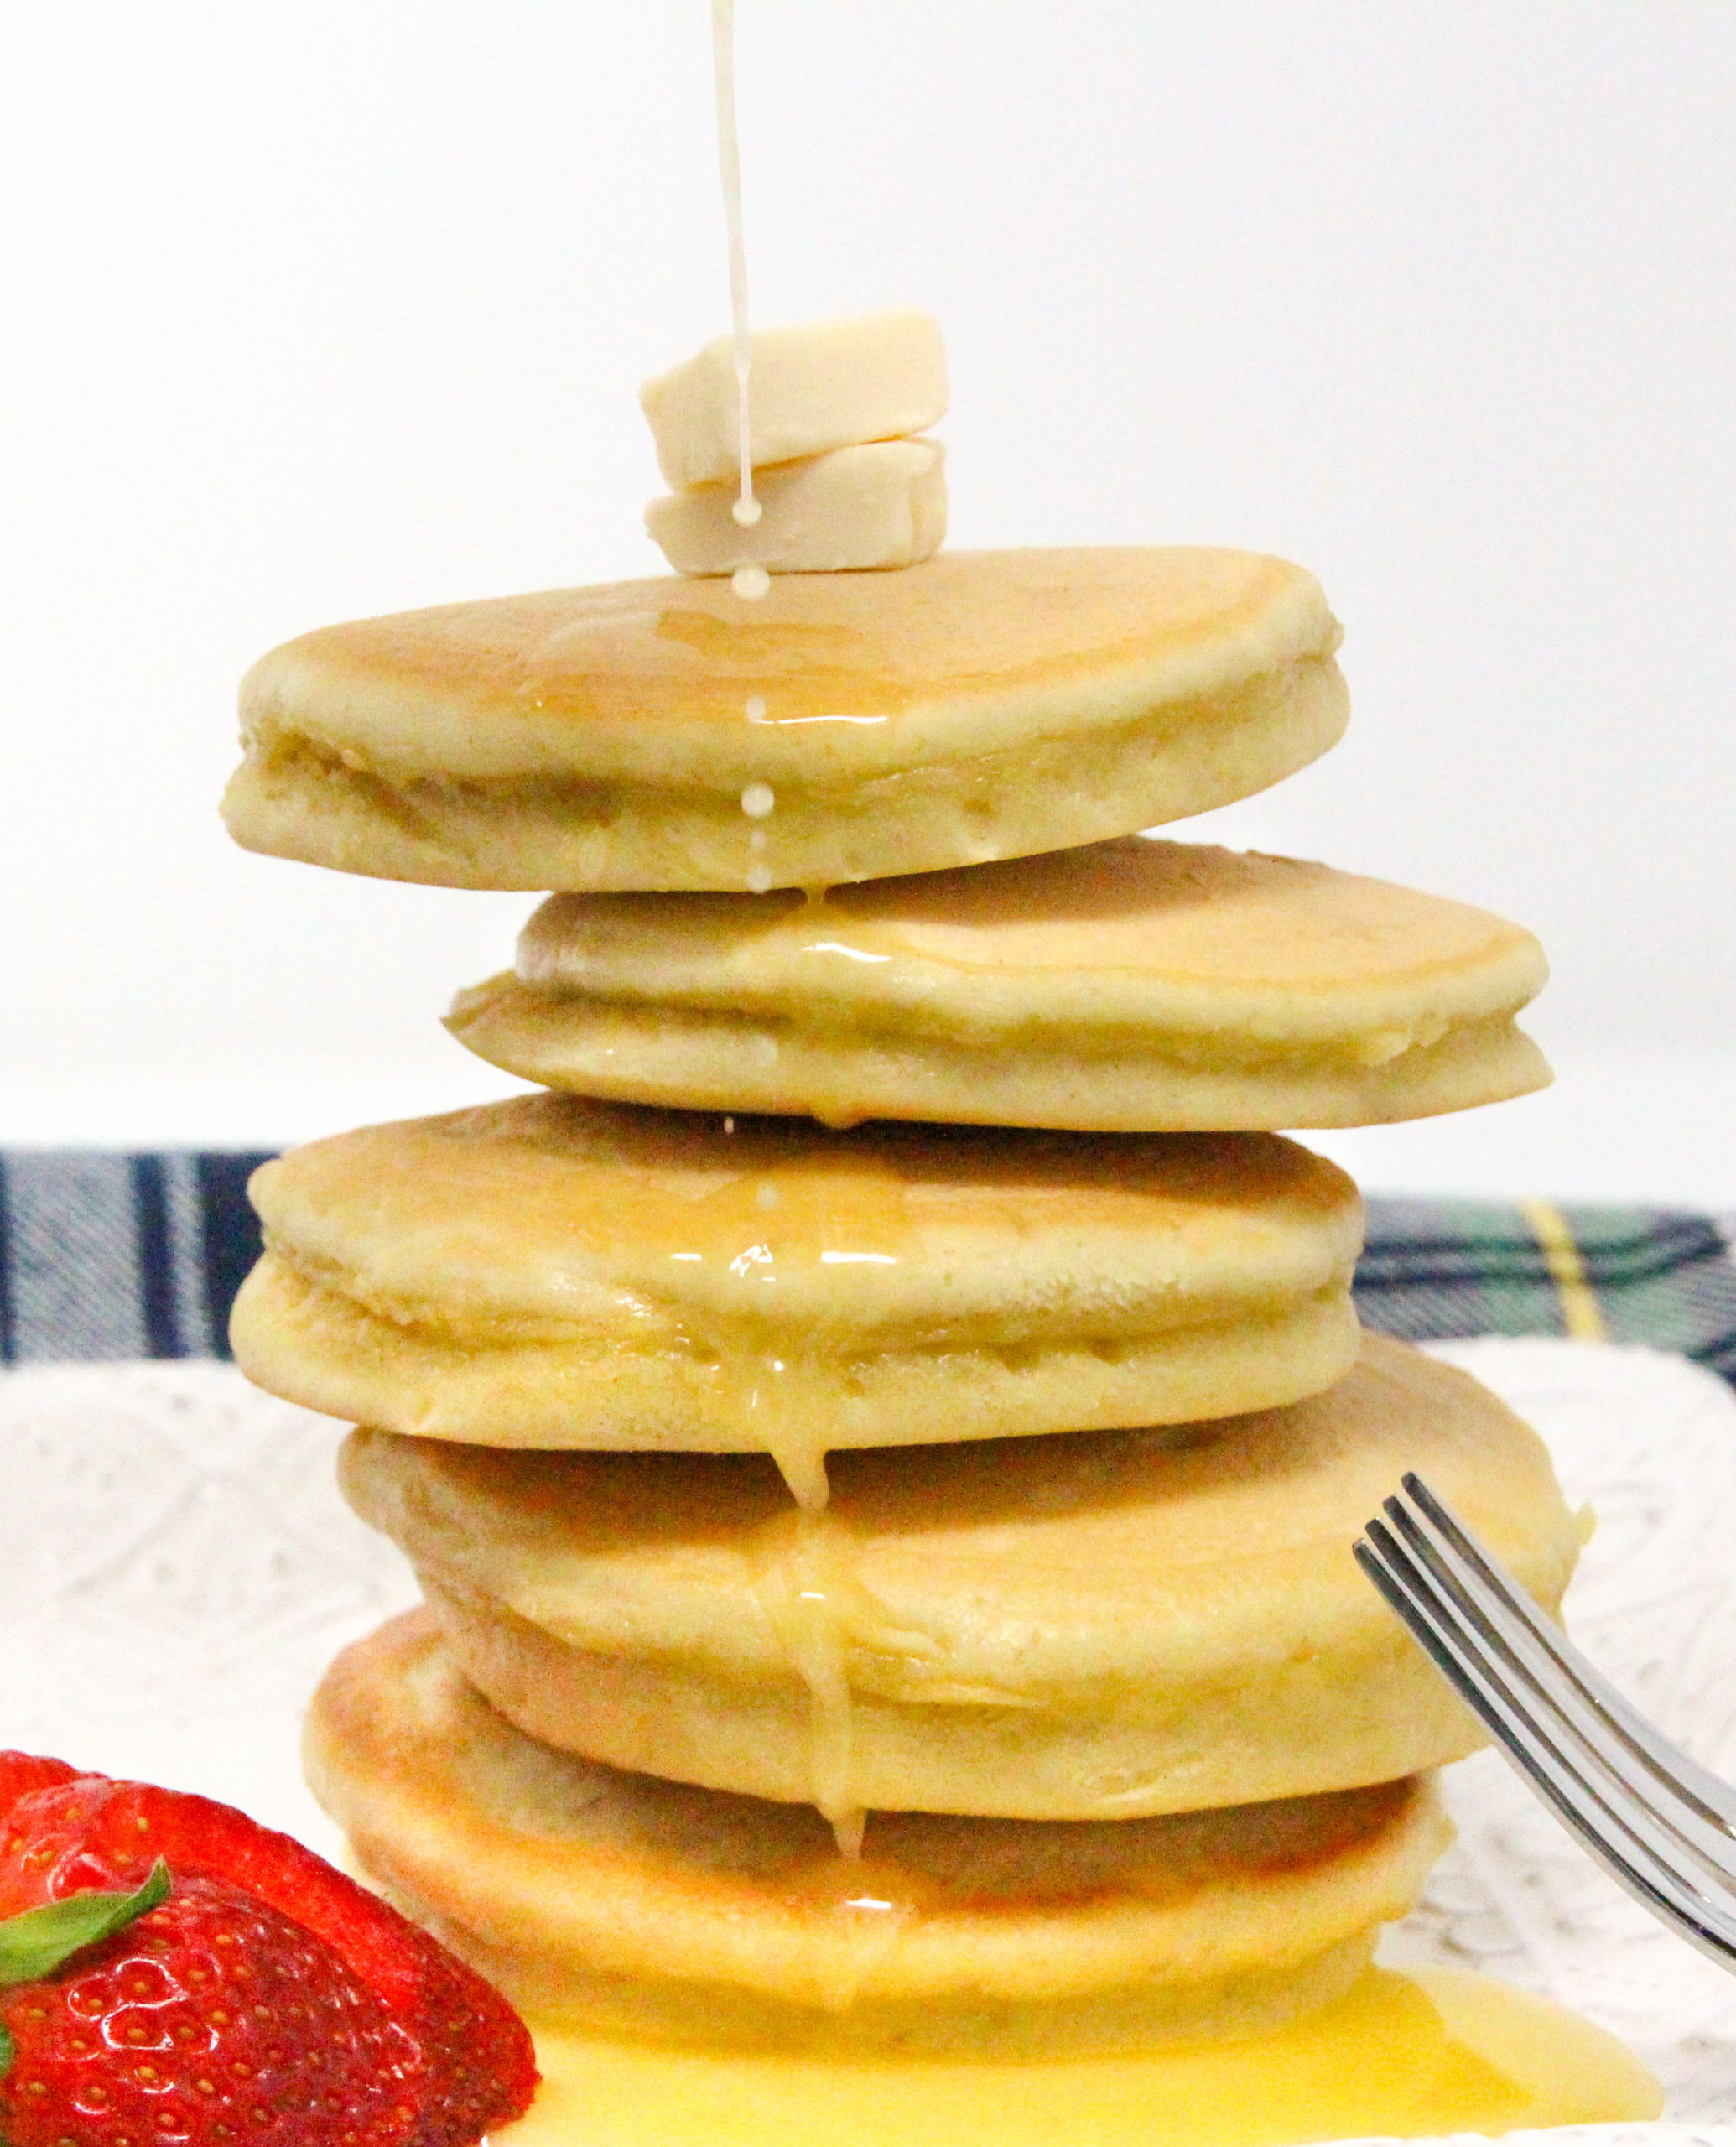 Scottish Pancakes AKA drop scones, combine a few simple ingredients to create a delicious breakfast! Sweeter than regular pancakes, these can be eaten alone with butter or topped with your favorite preserves or syrup. Recipe shared with permission granted by Paige Shelton, author of DEADLY EDITIONS.